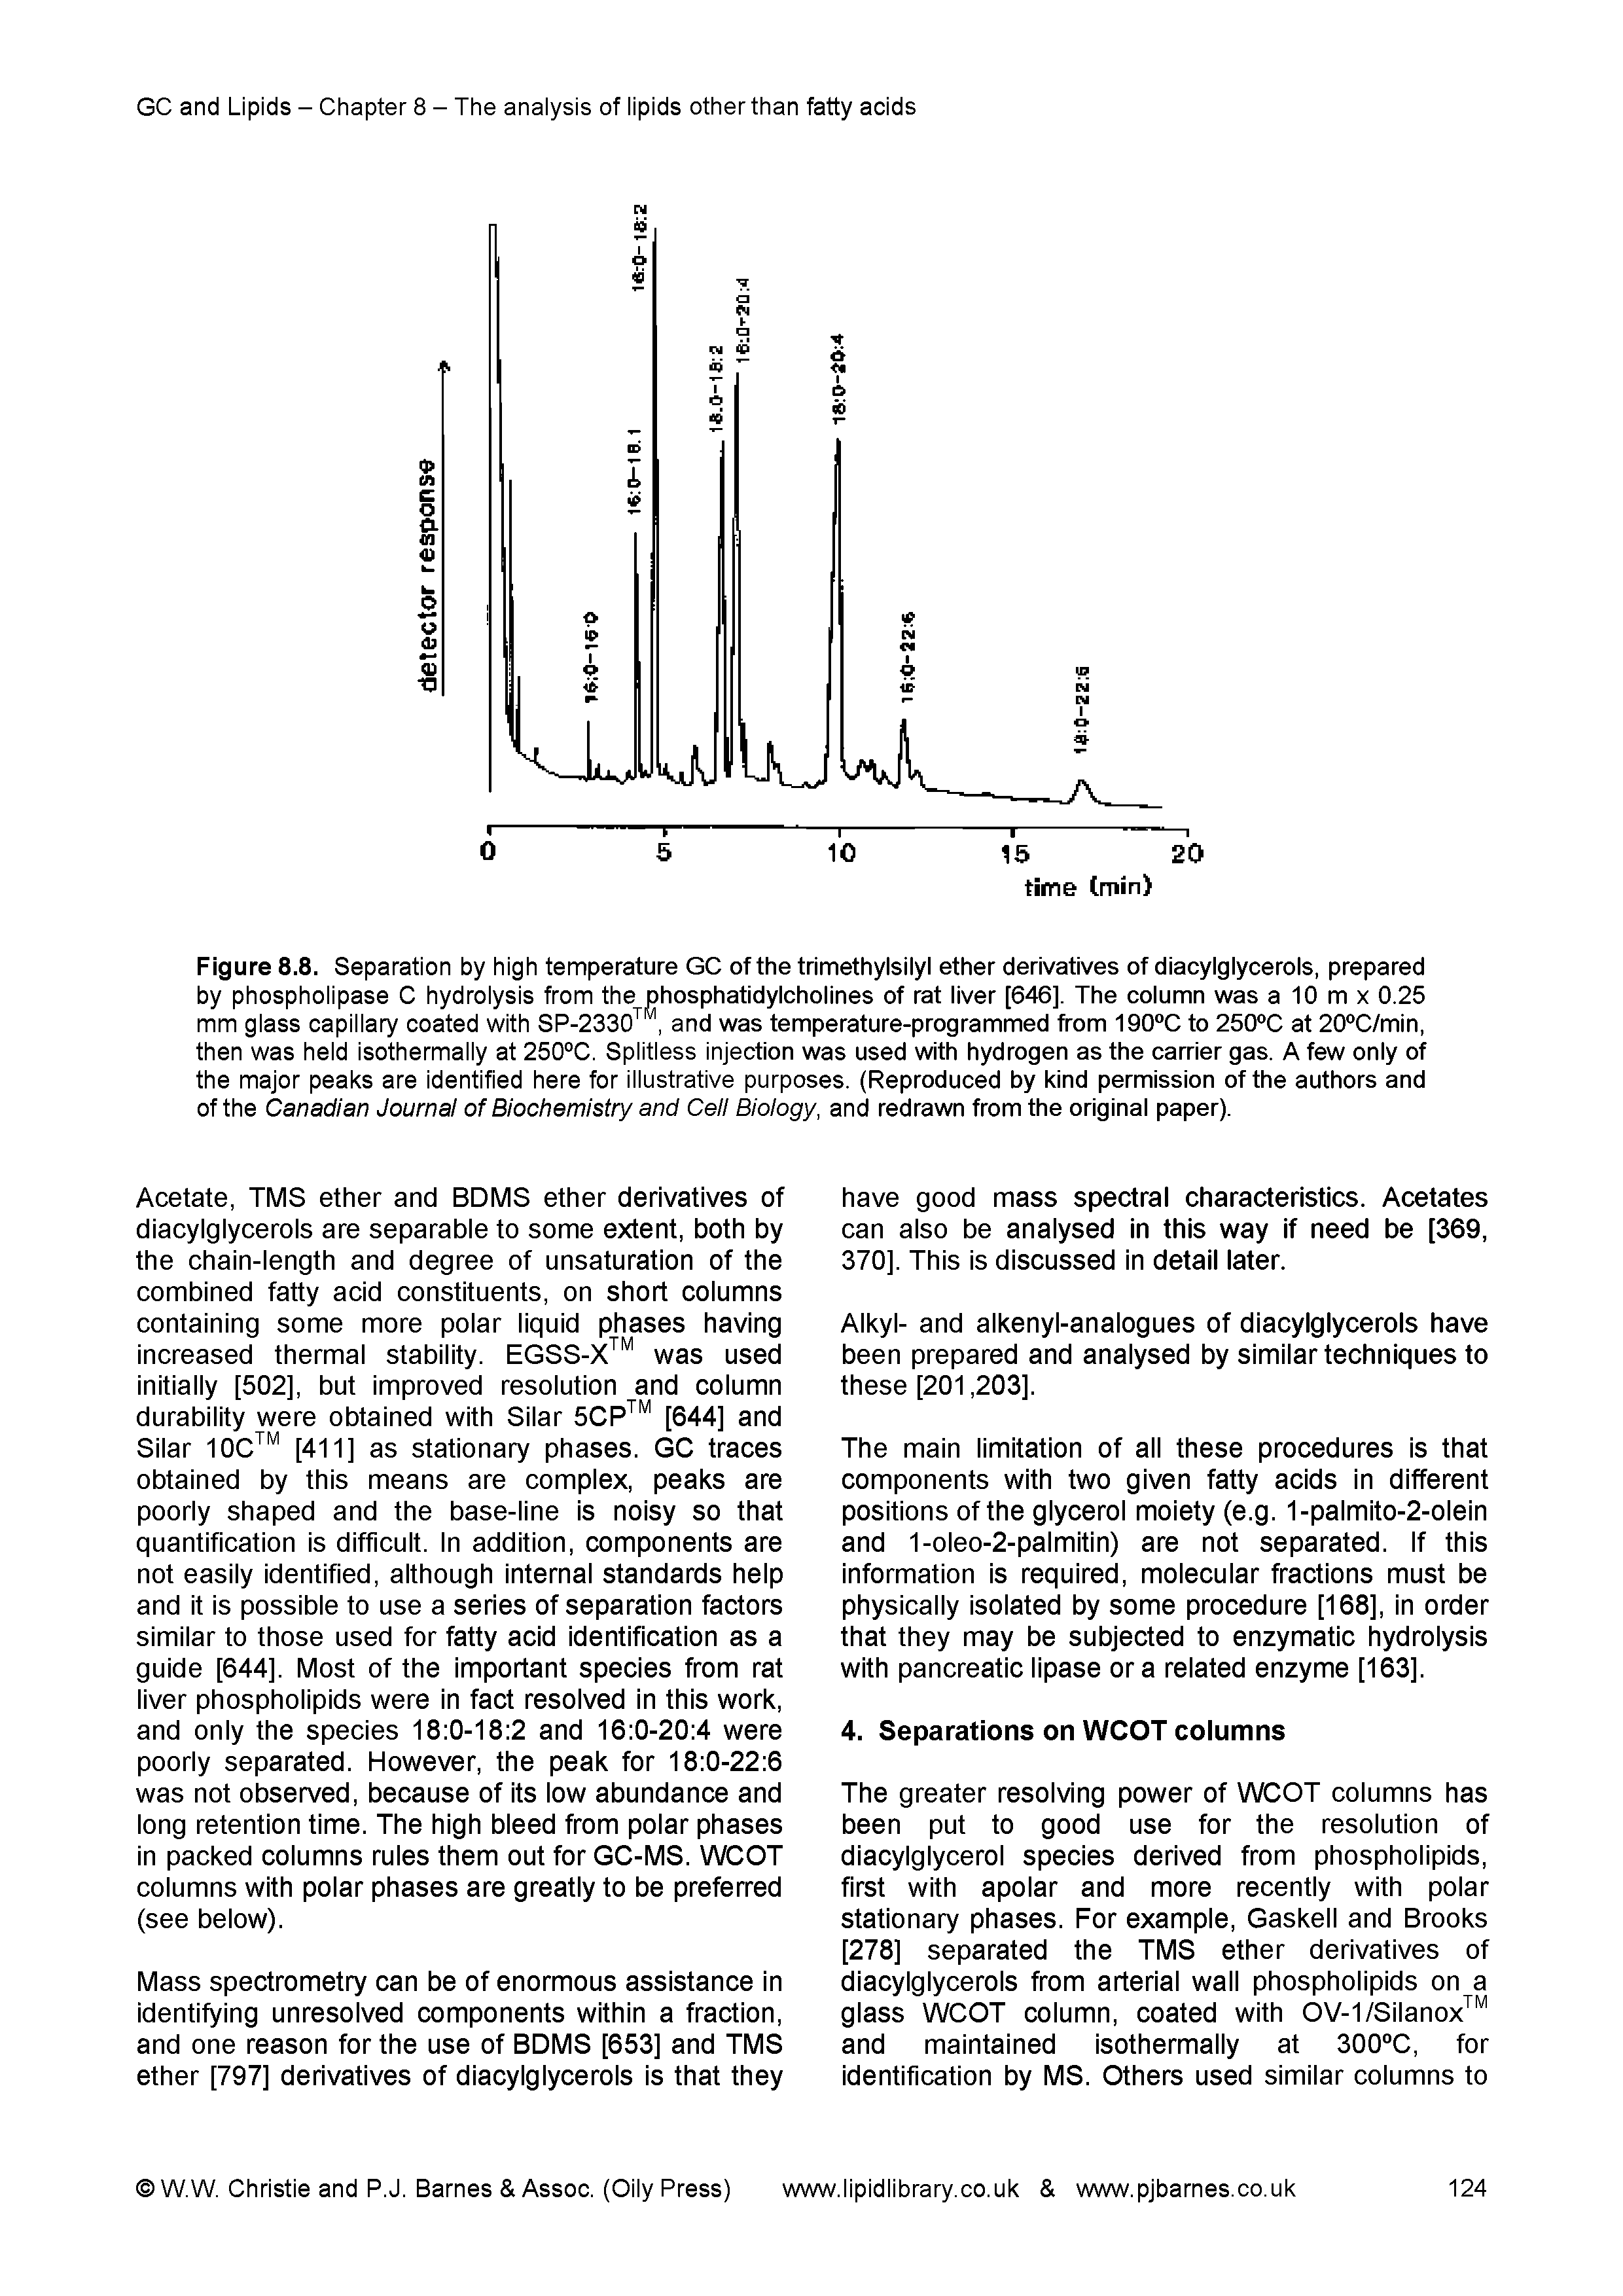 Figure 8.8. Separation by high temperature GC of the trimethylsilyl ether derivatives of diacylglycerols, prepared by phospholipase C hydrolysis from the phosphatidylcholines of rat liver [646], The column was a 10 m x 0.25 mm glass capillary coated with SP-2330 , and was temperature-programmed from 190°C to 250 C at 20 C/min, then was held isothermally at 250°C. Splitless injection was used with hydrogen as the carrier gas. A few only of the major peaks are identified here for illustrative purposes. (Reproduced by kind permission of the authors and of the Canadian Journal of Biochemistry and Cell Biology, and redrawn from the original paper).